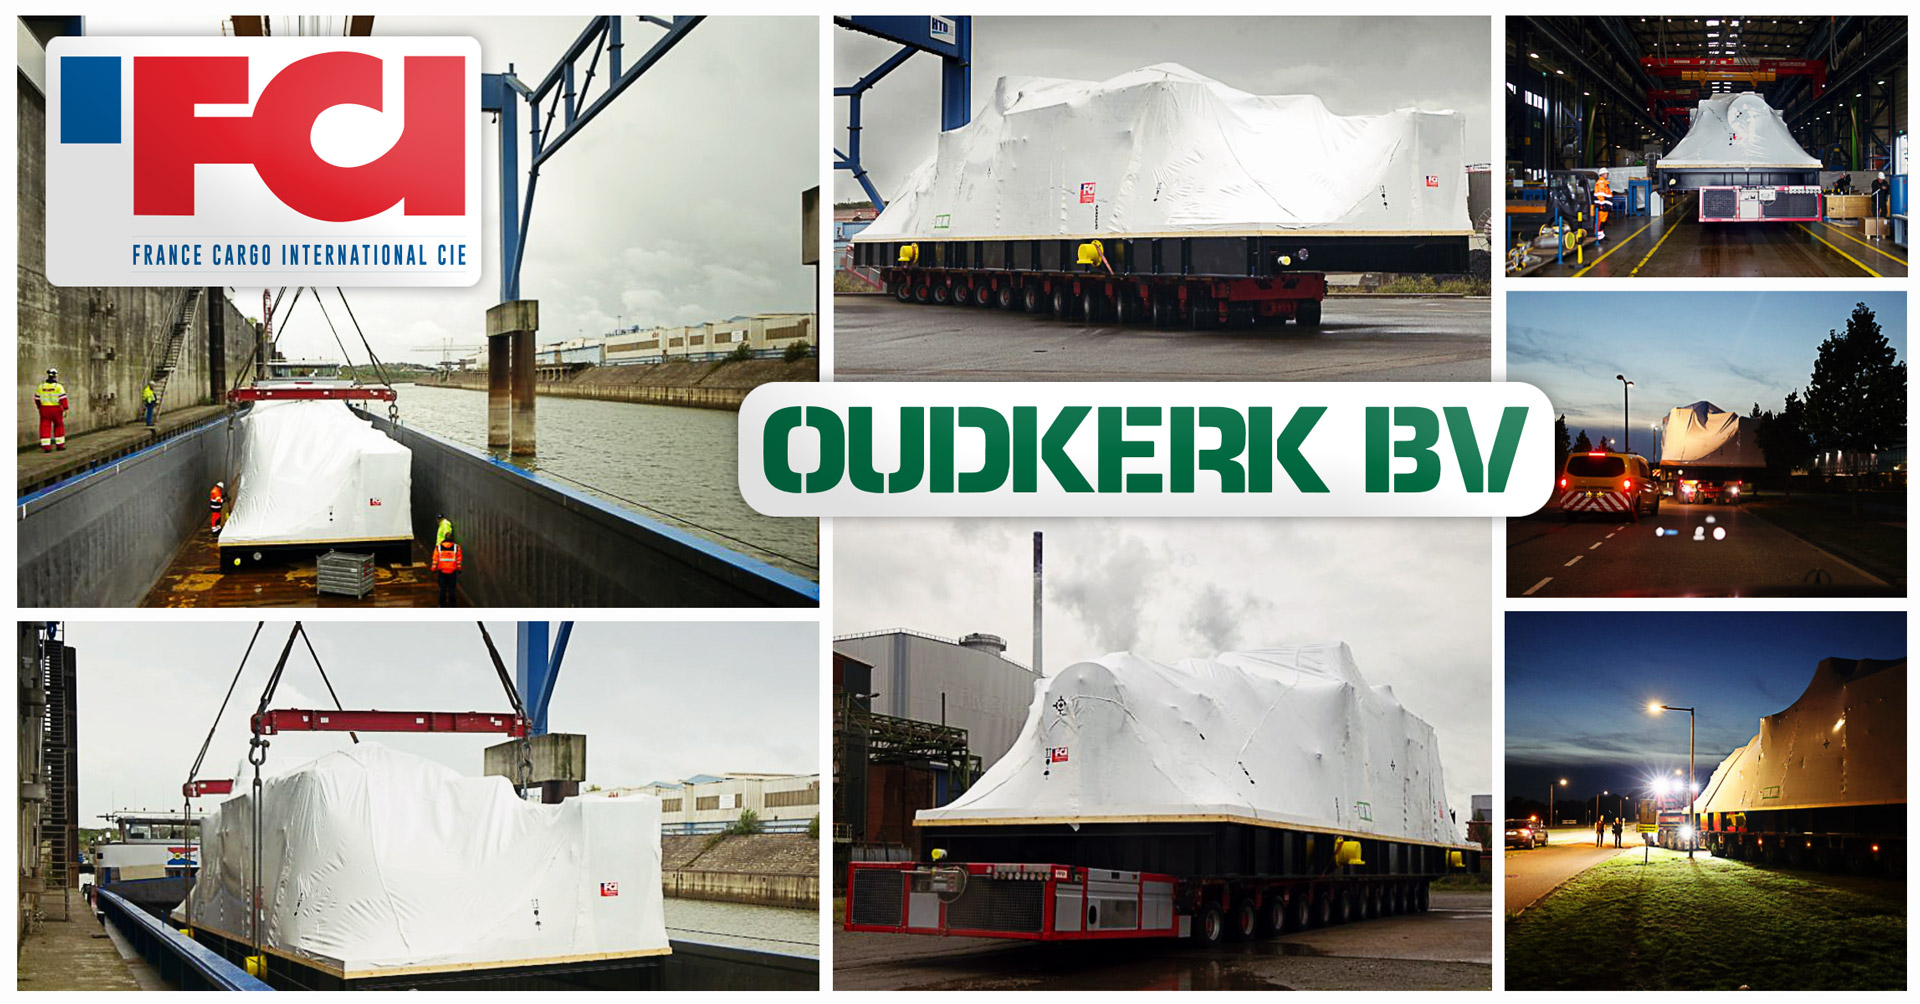 FCI and Oudkerk Cooperated to Move a 180mt Piece of Cargo